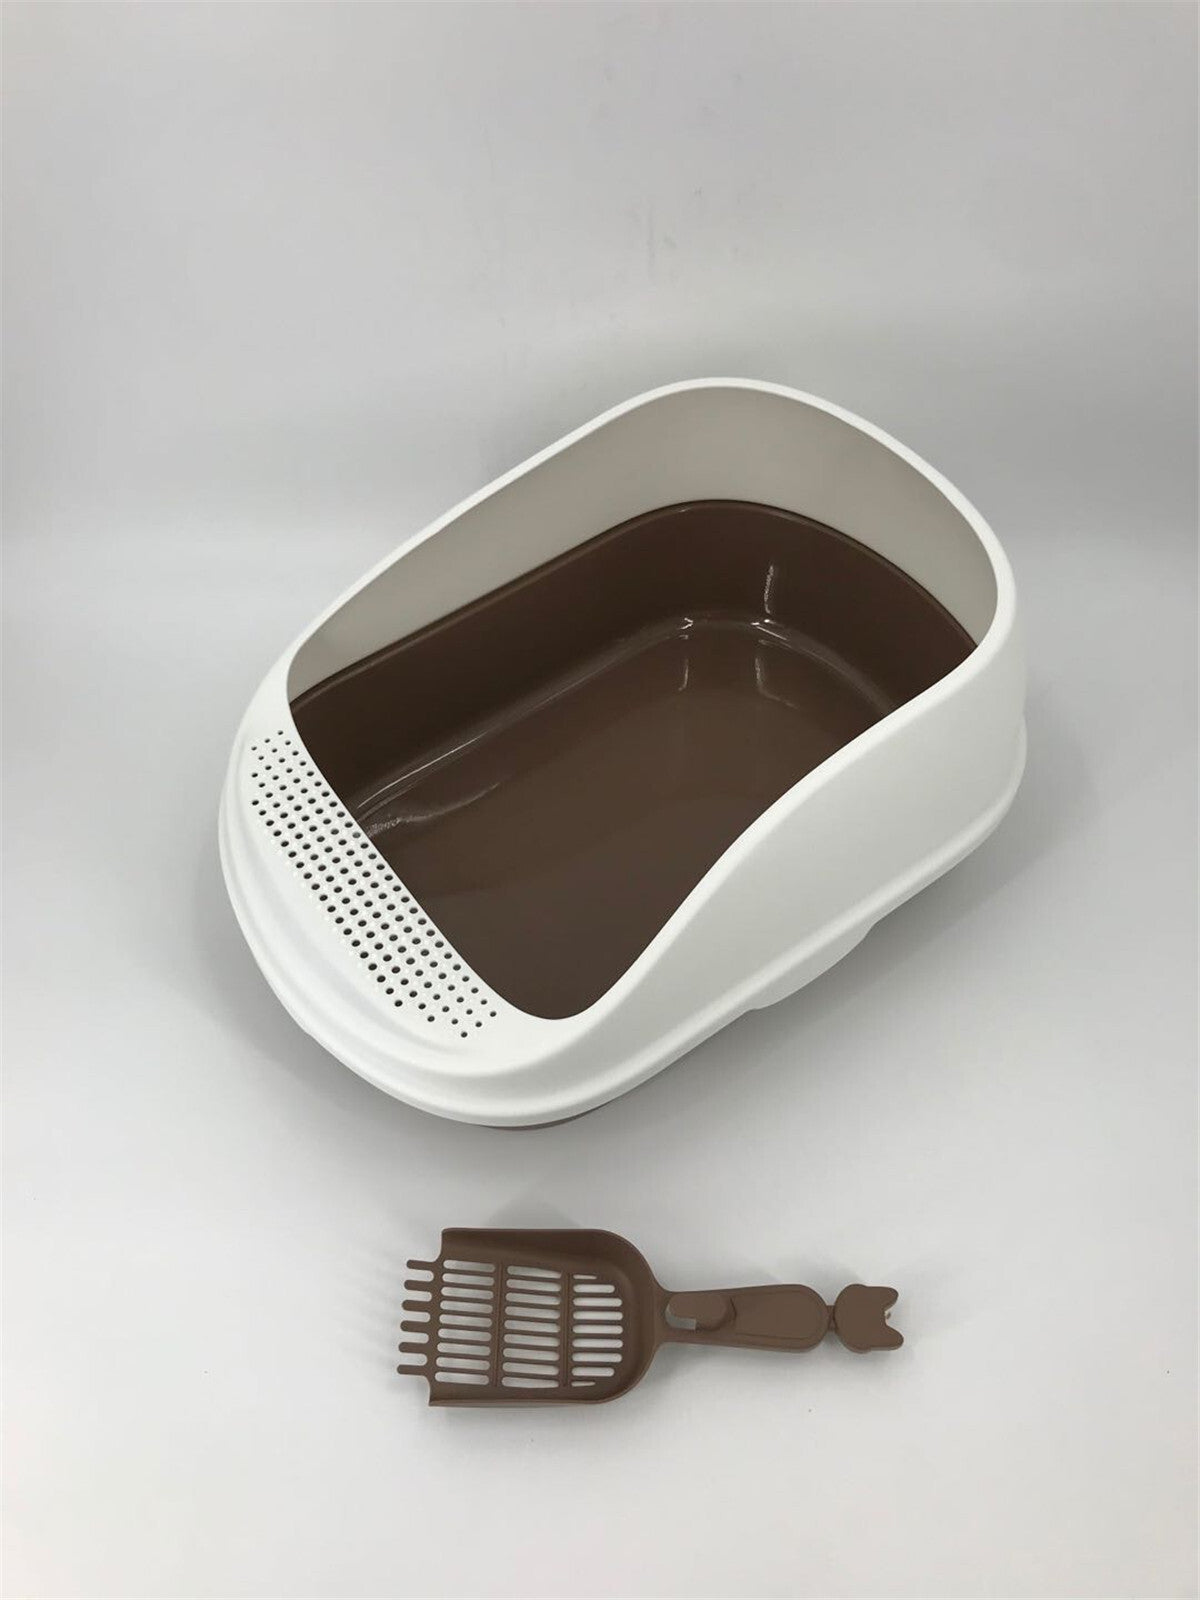 YES4PETS Large Portable Cat Toilet Litter Box Tray with Scoop Brown